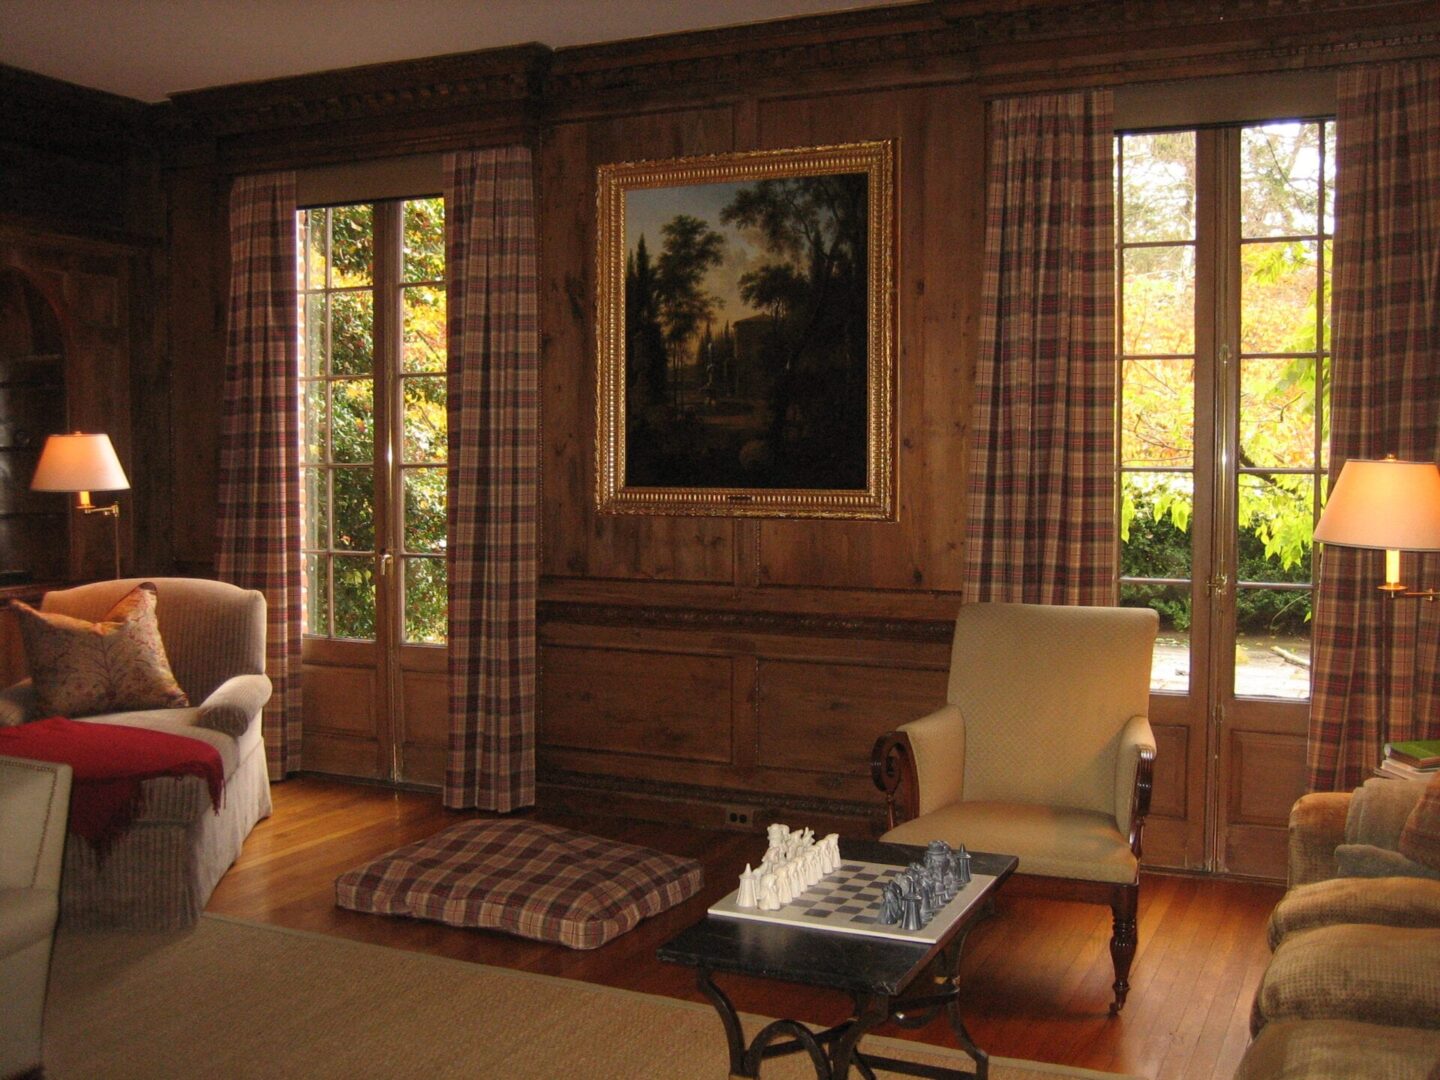 A living room with wood paneling and plaid curtains.